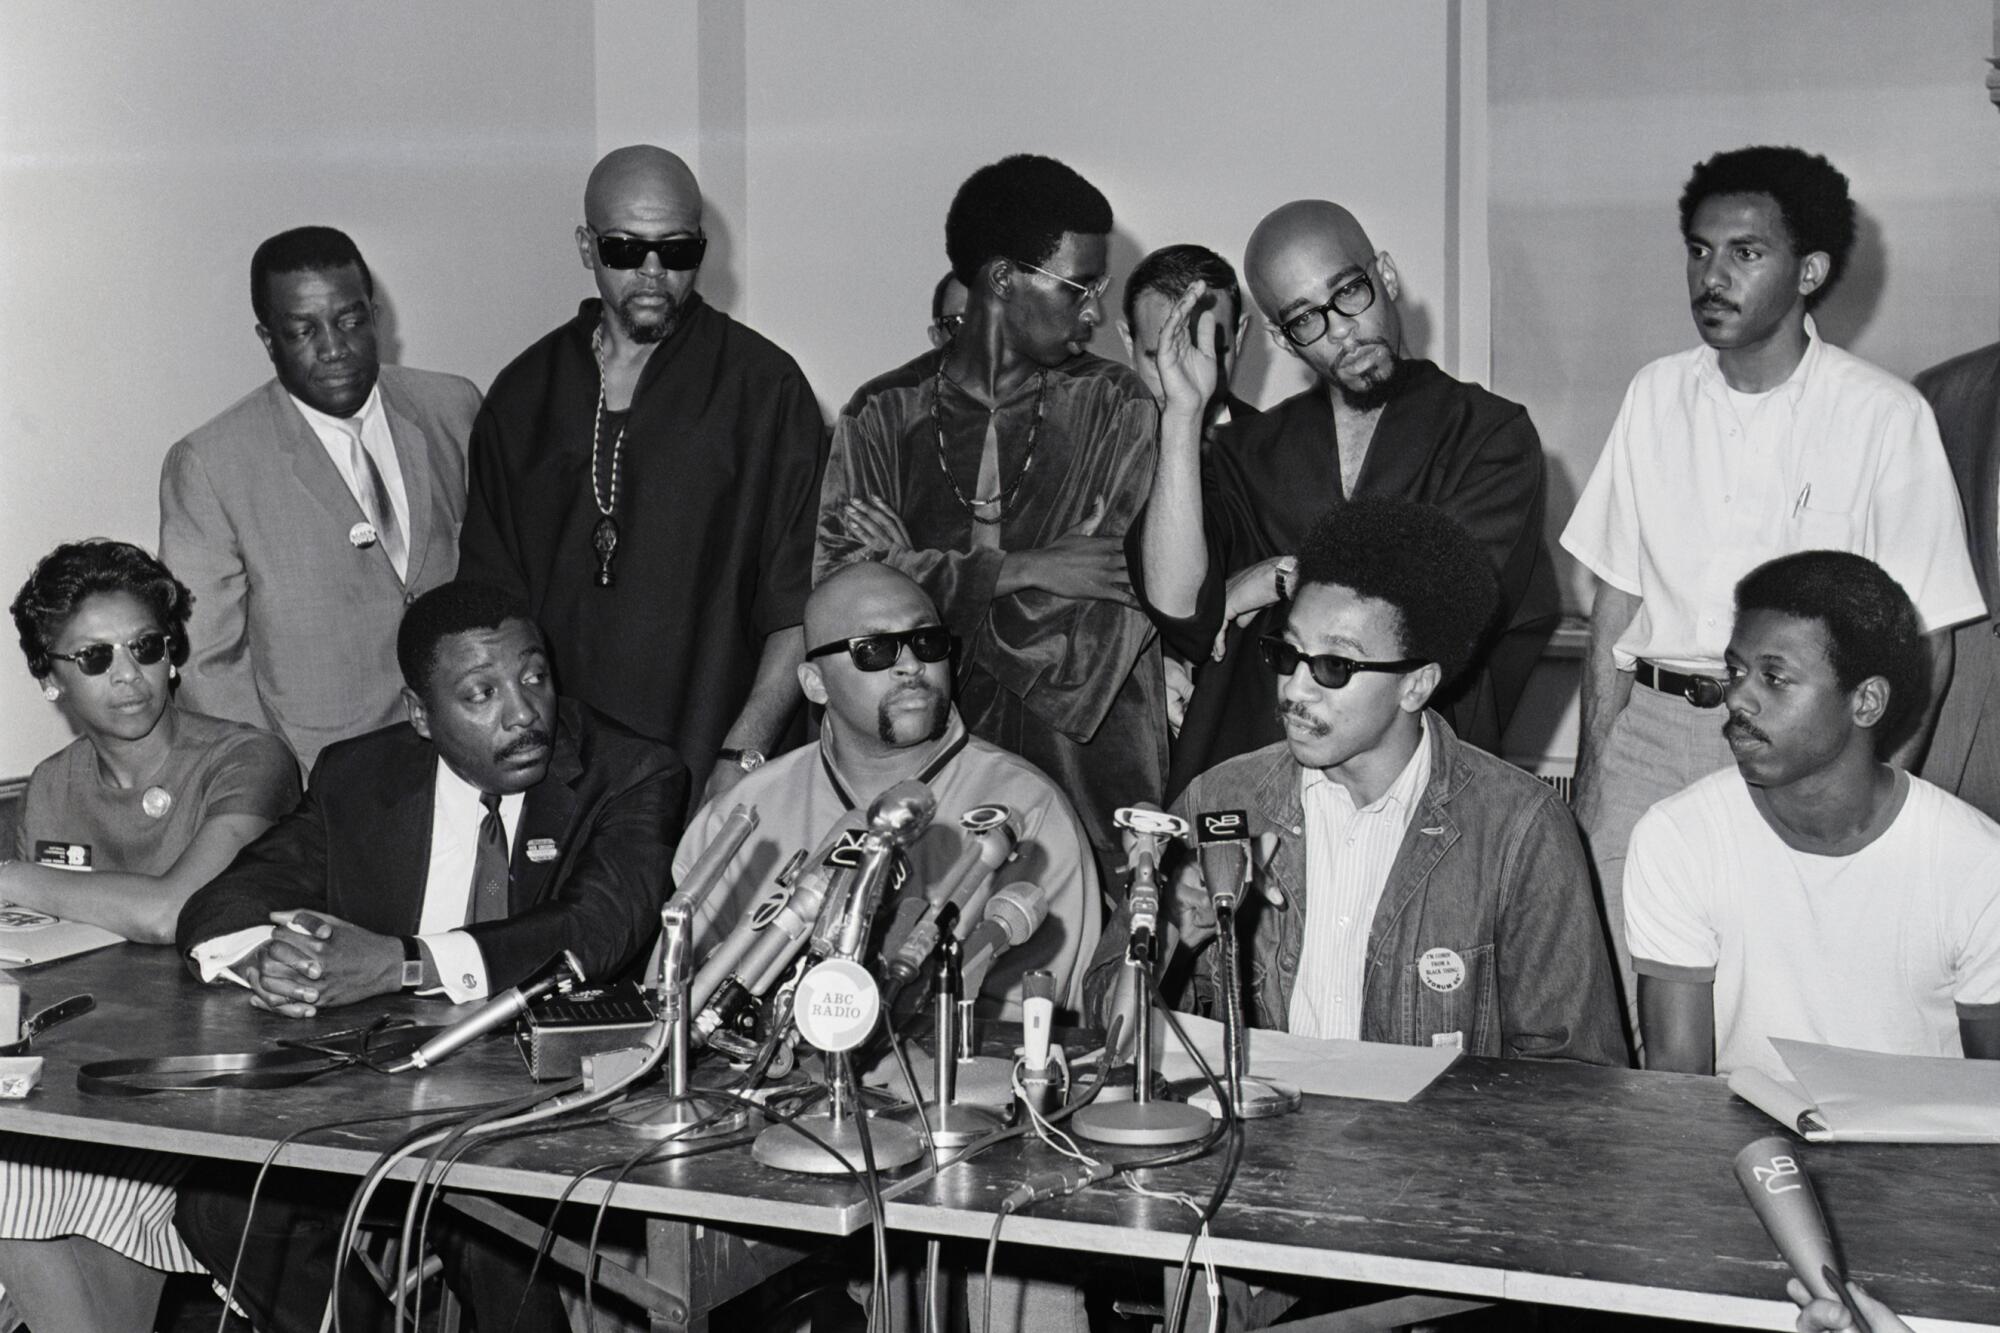 A woman is seated at far left alongside four men at microphones, and several more men standing behind